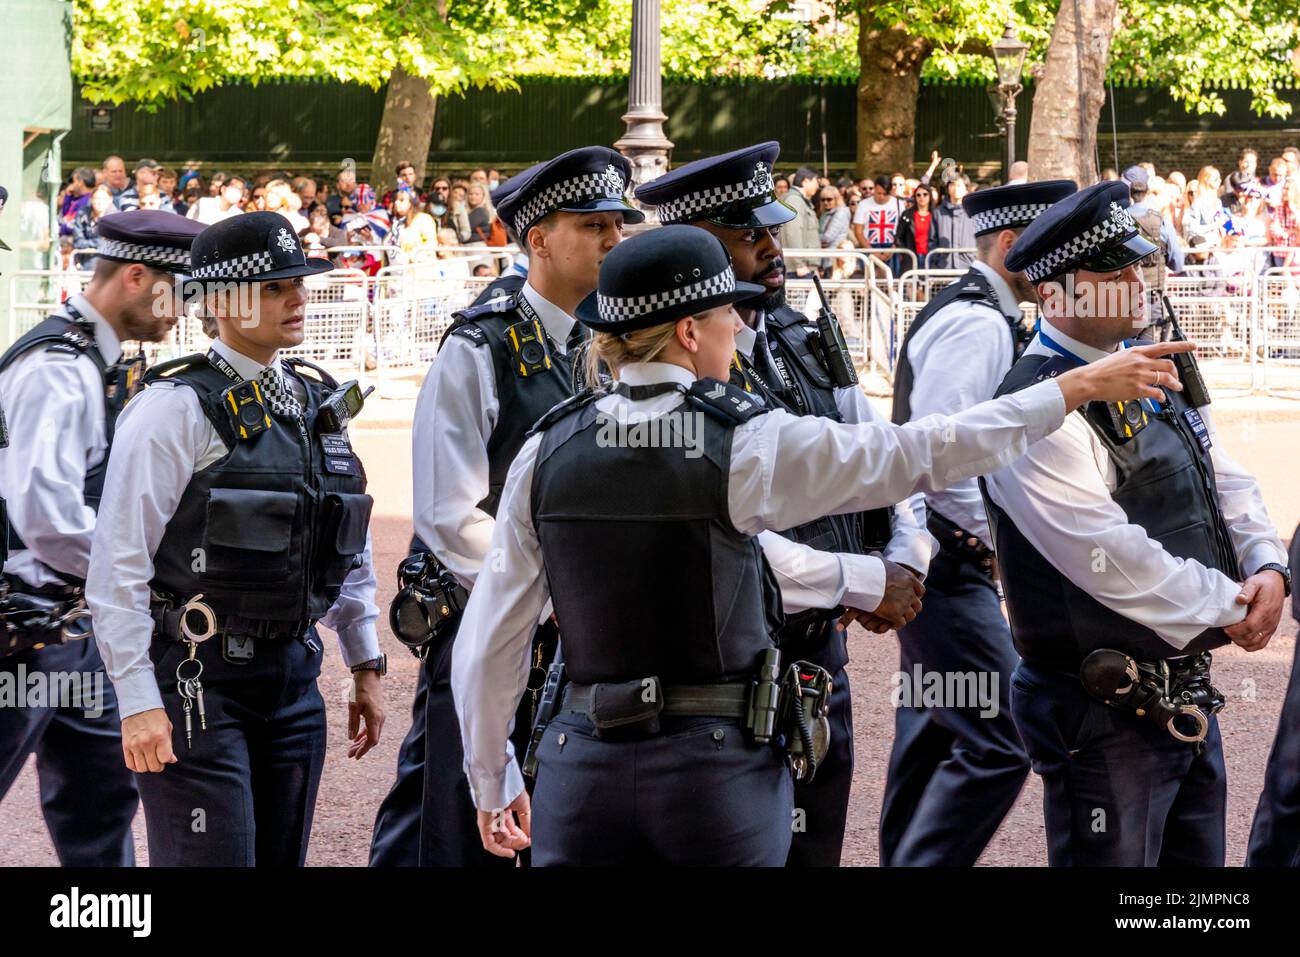 A Group Of Police Officers In The Mall During The Queen's Platinum Jubilee Celebrations, London, UK. Stock Photo